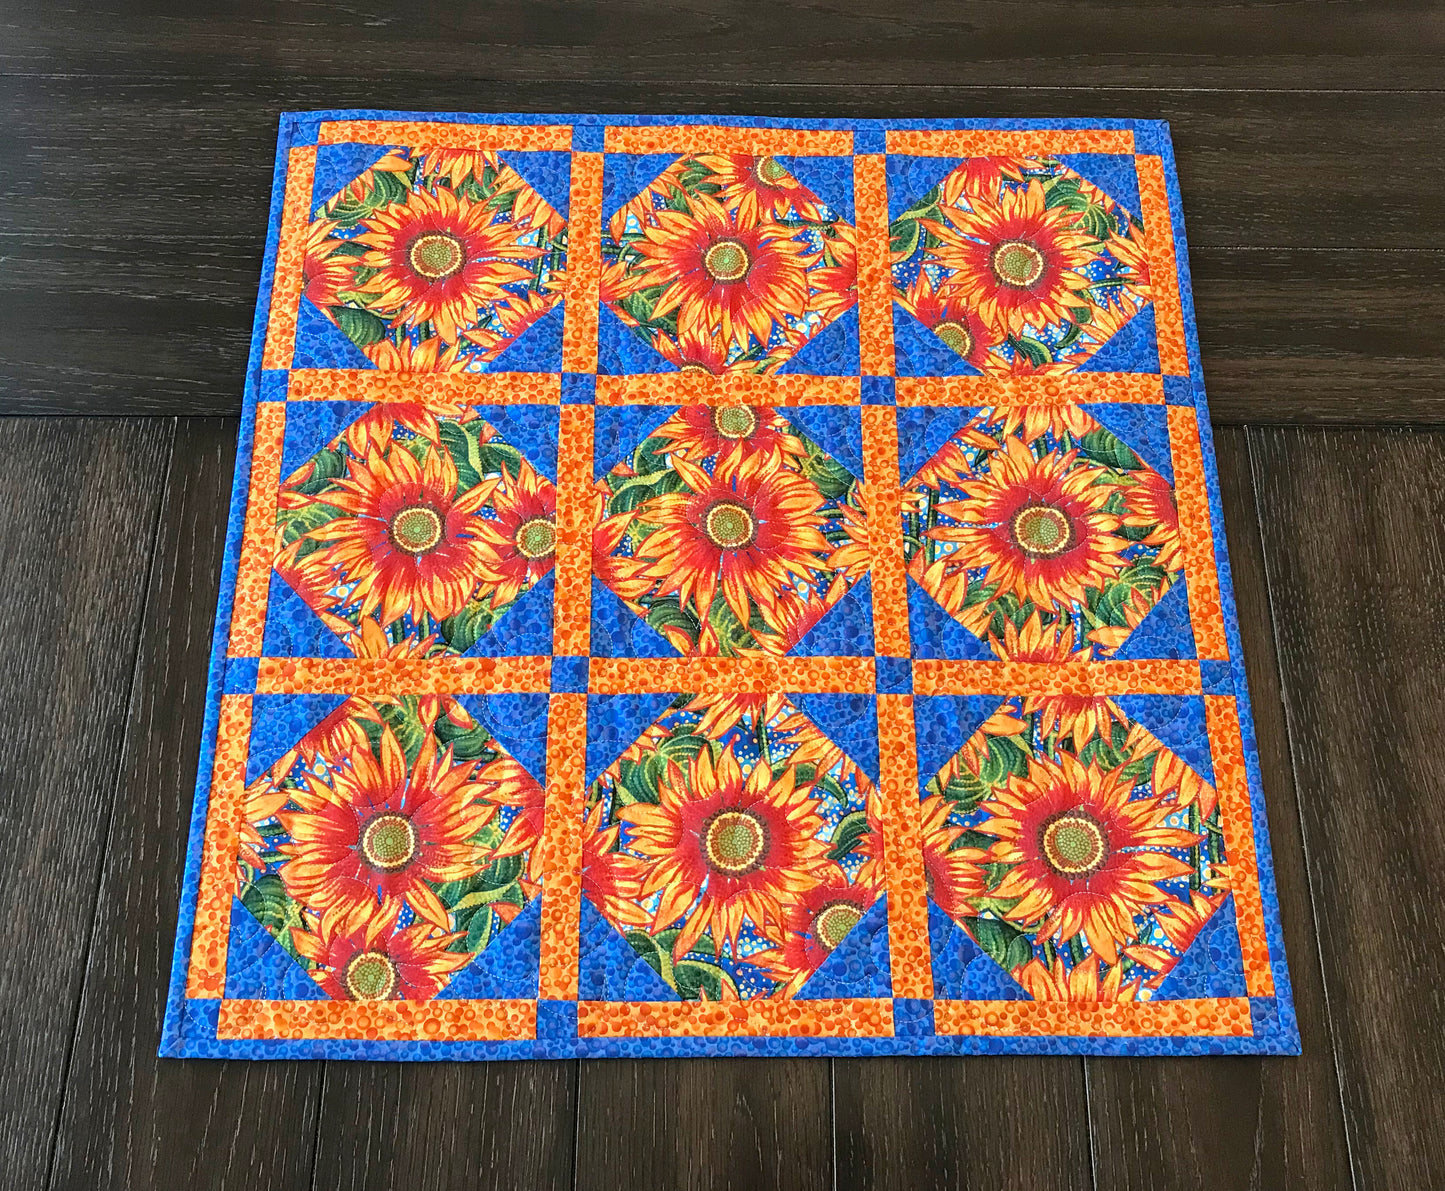 Sunflower Themed Table Topper - Handmade Quilts, Digital Patterns, and Home Décor items online - Cuddle Cat Quiltworks